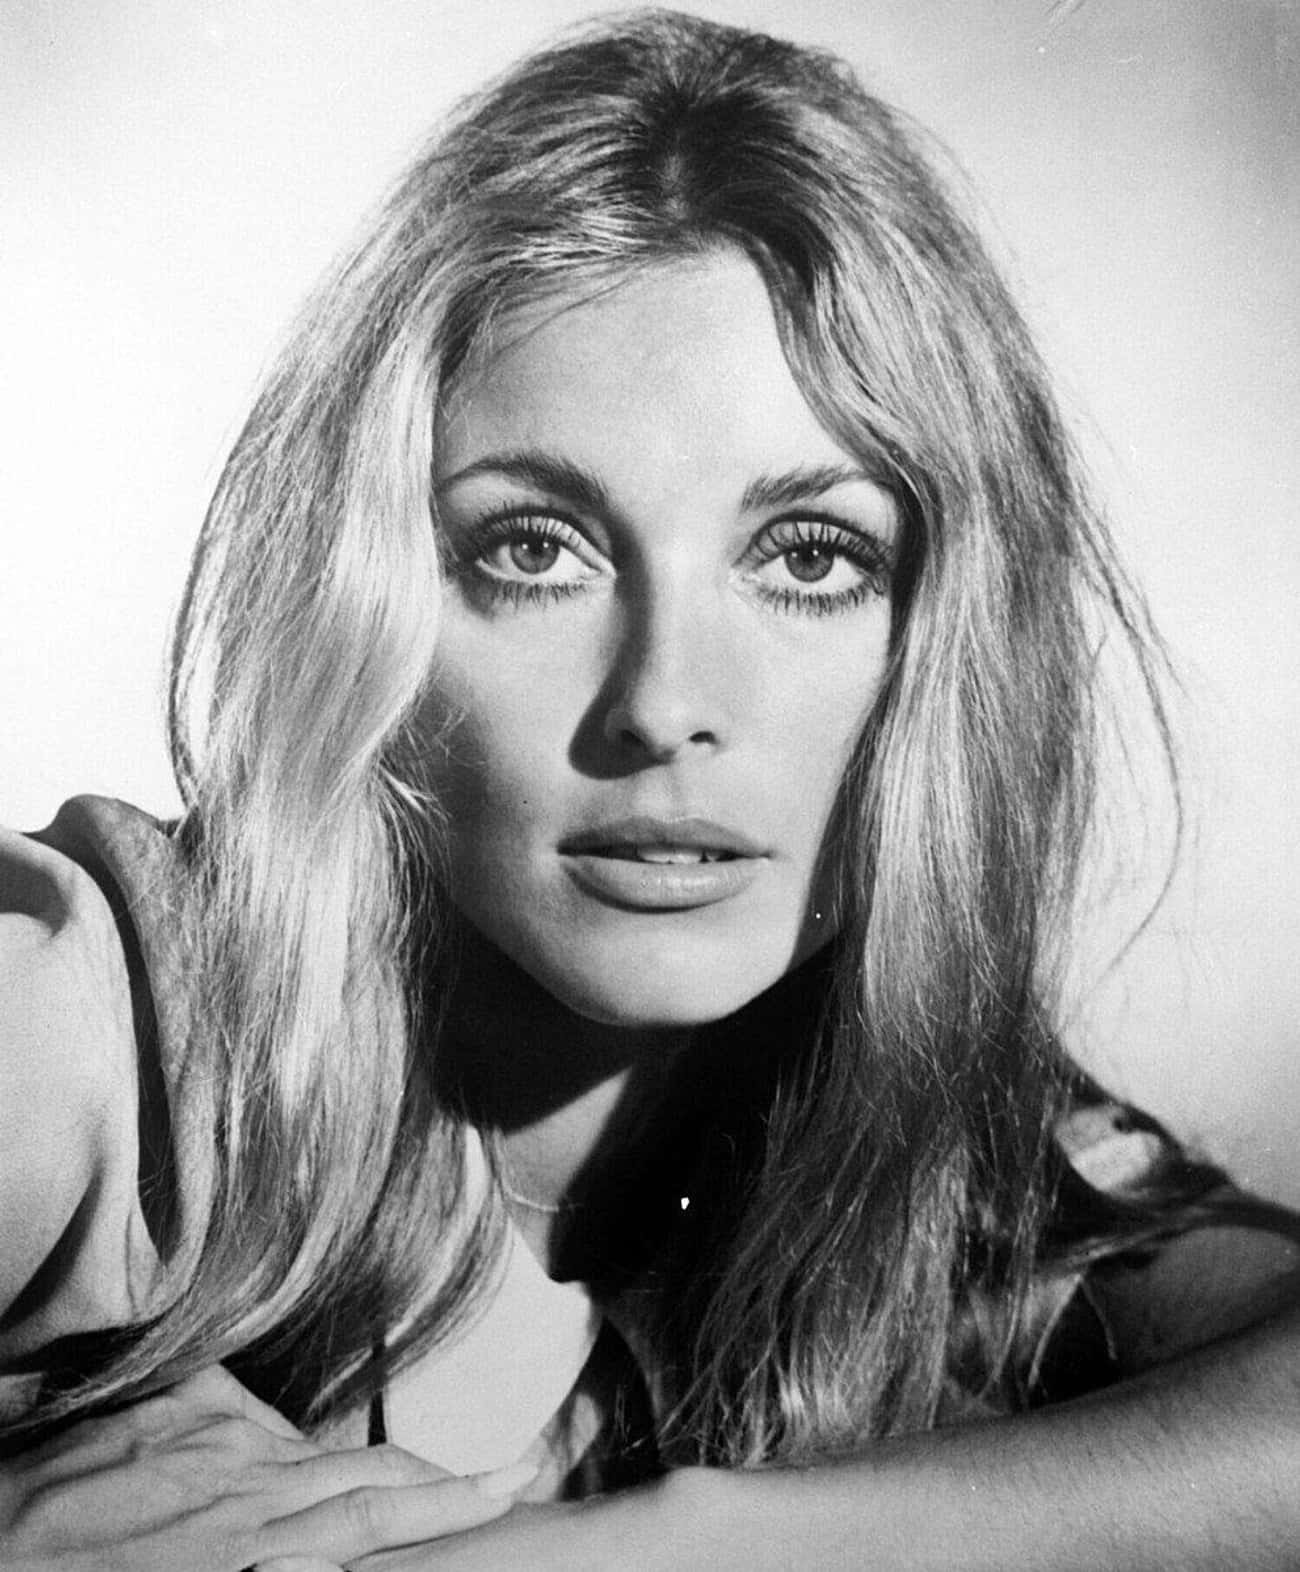 Sharon Tate And Roman Polanski Never Met Manson In Real Life, But Inadvertently Became His Most Tragic Celebrity Connection